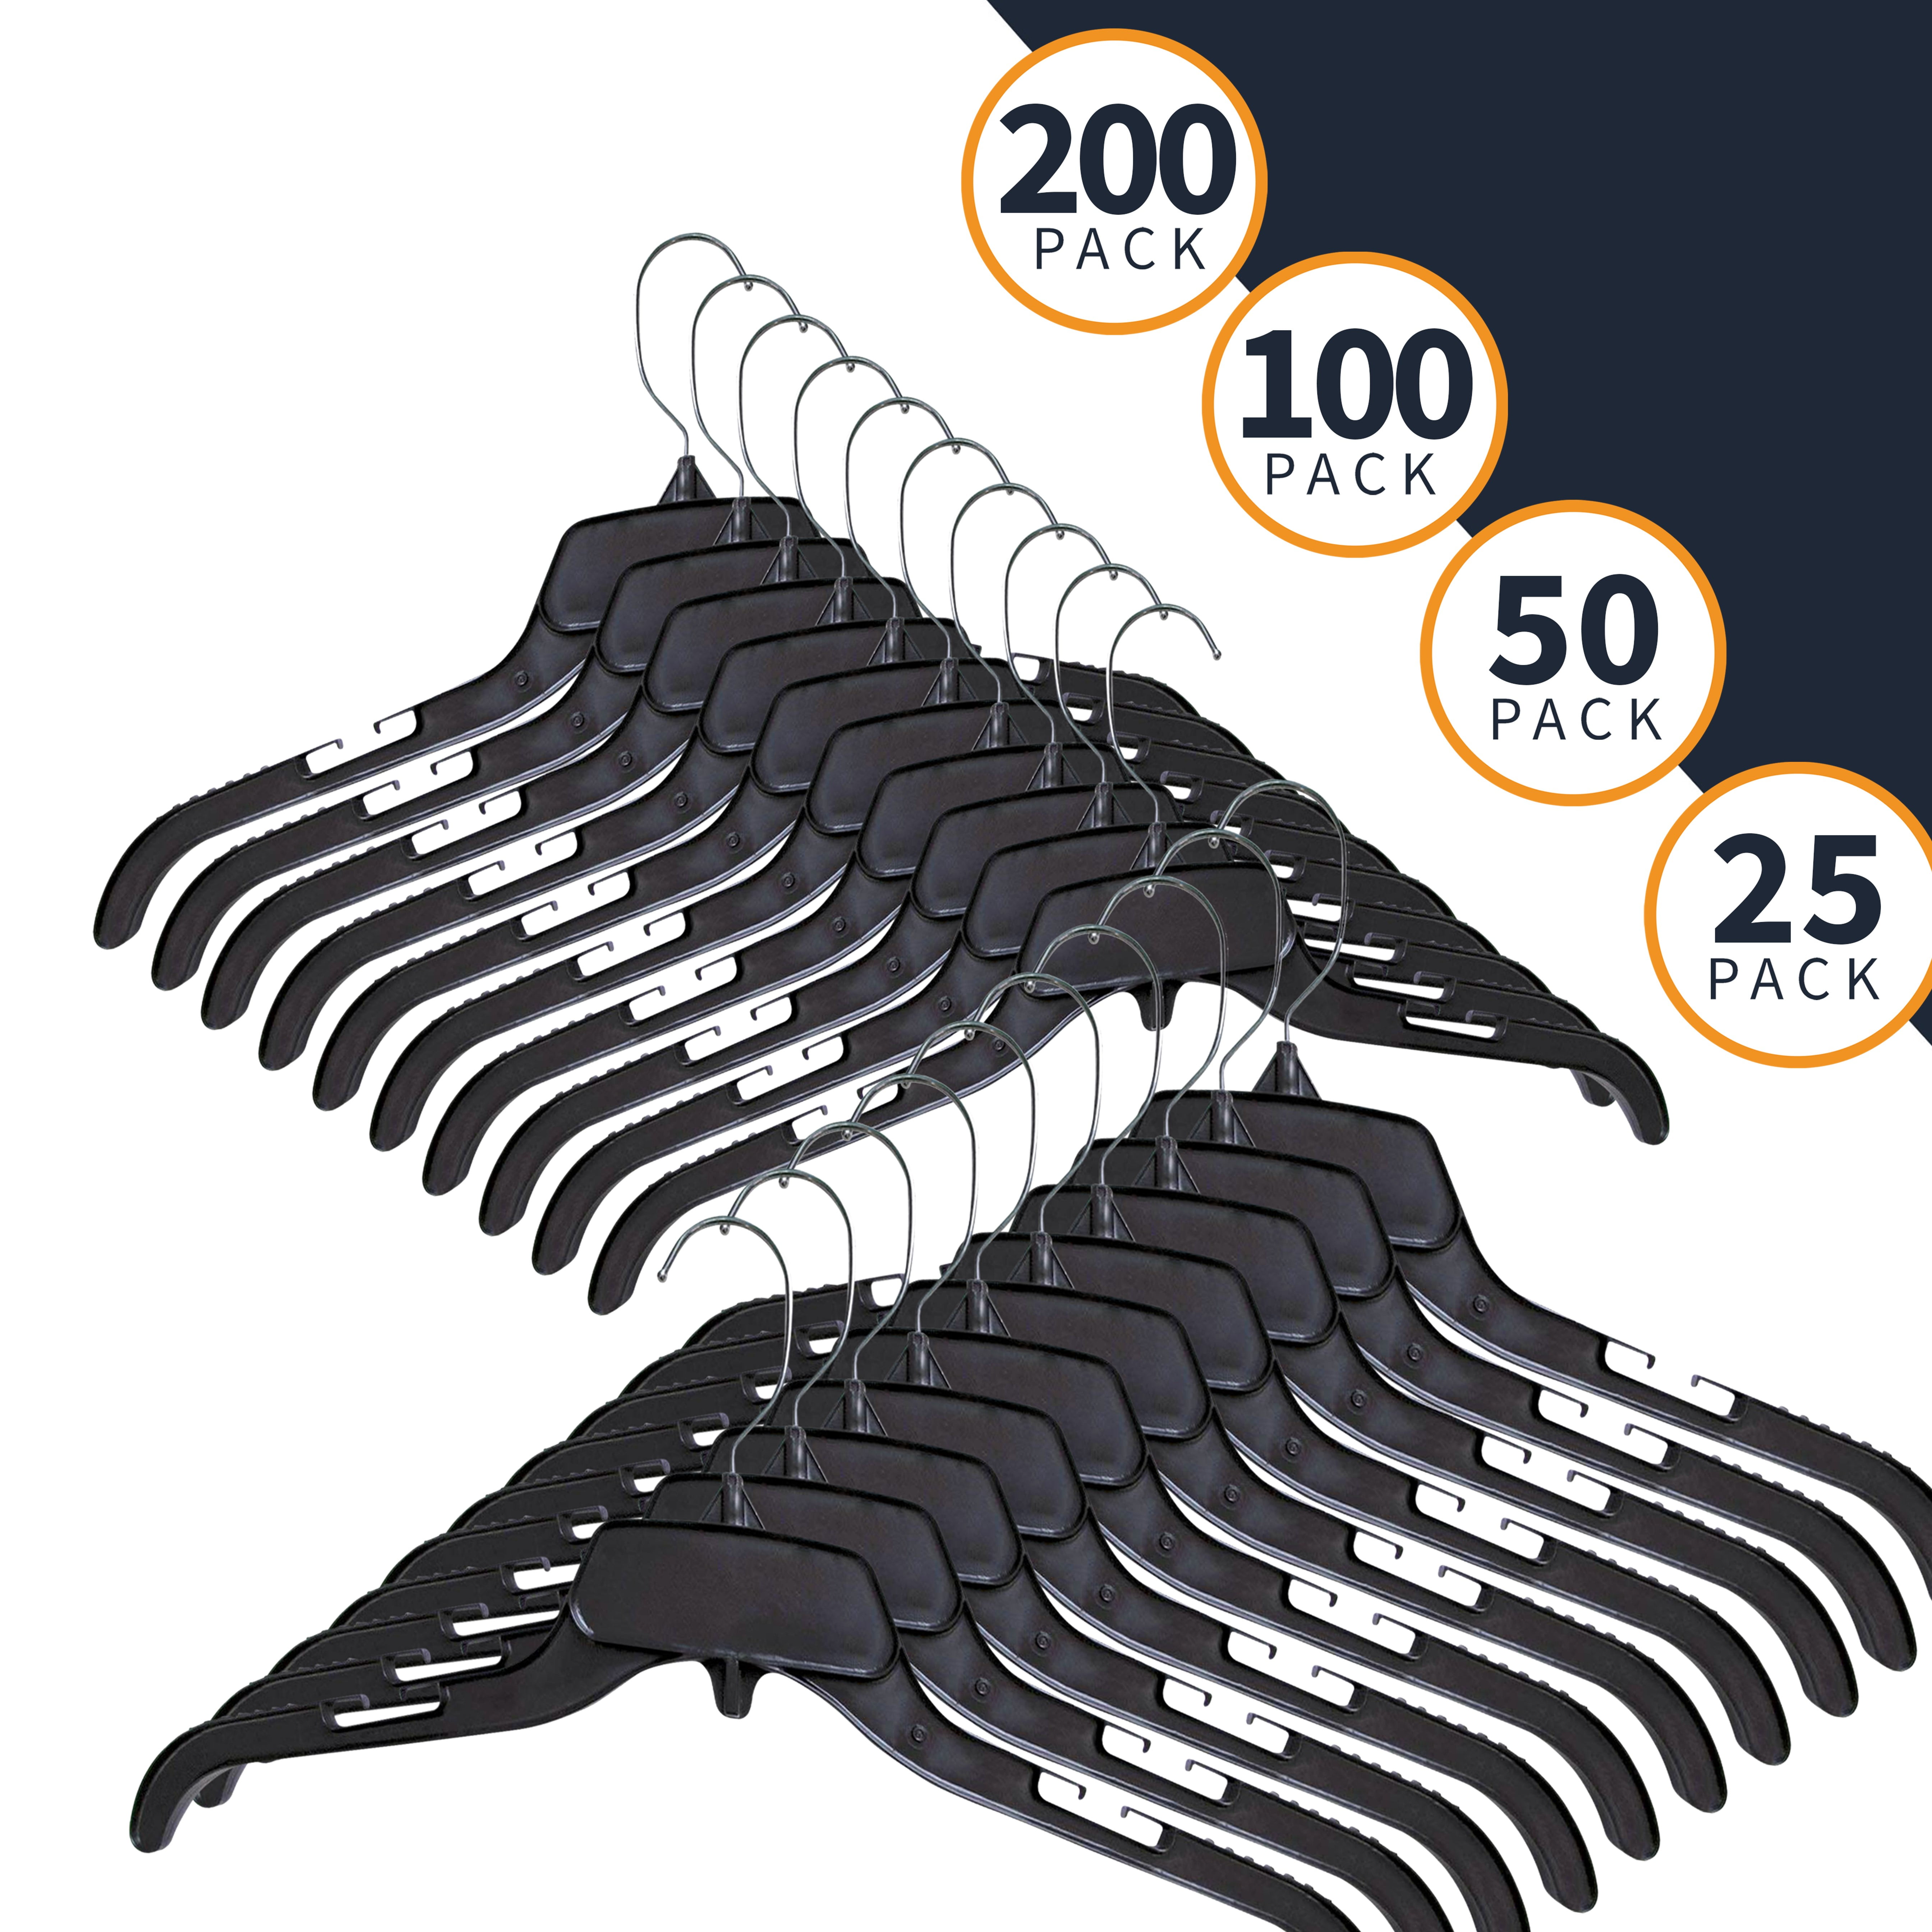 50 Hangers Black For Suit, Shirts, Pants, Skirts - 50 Pack Random Size/type